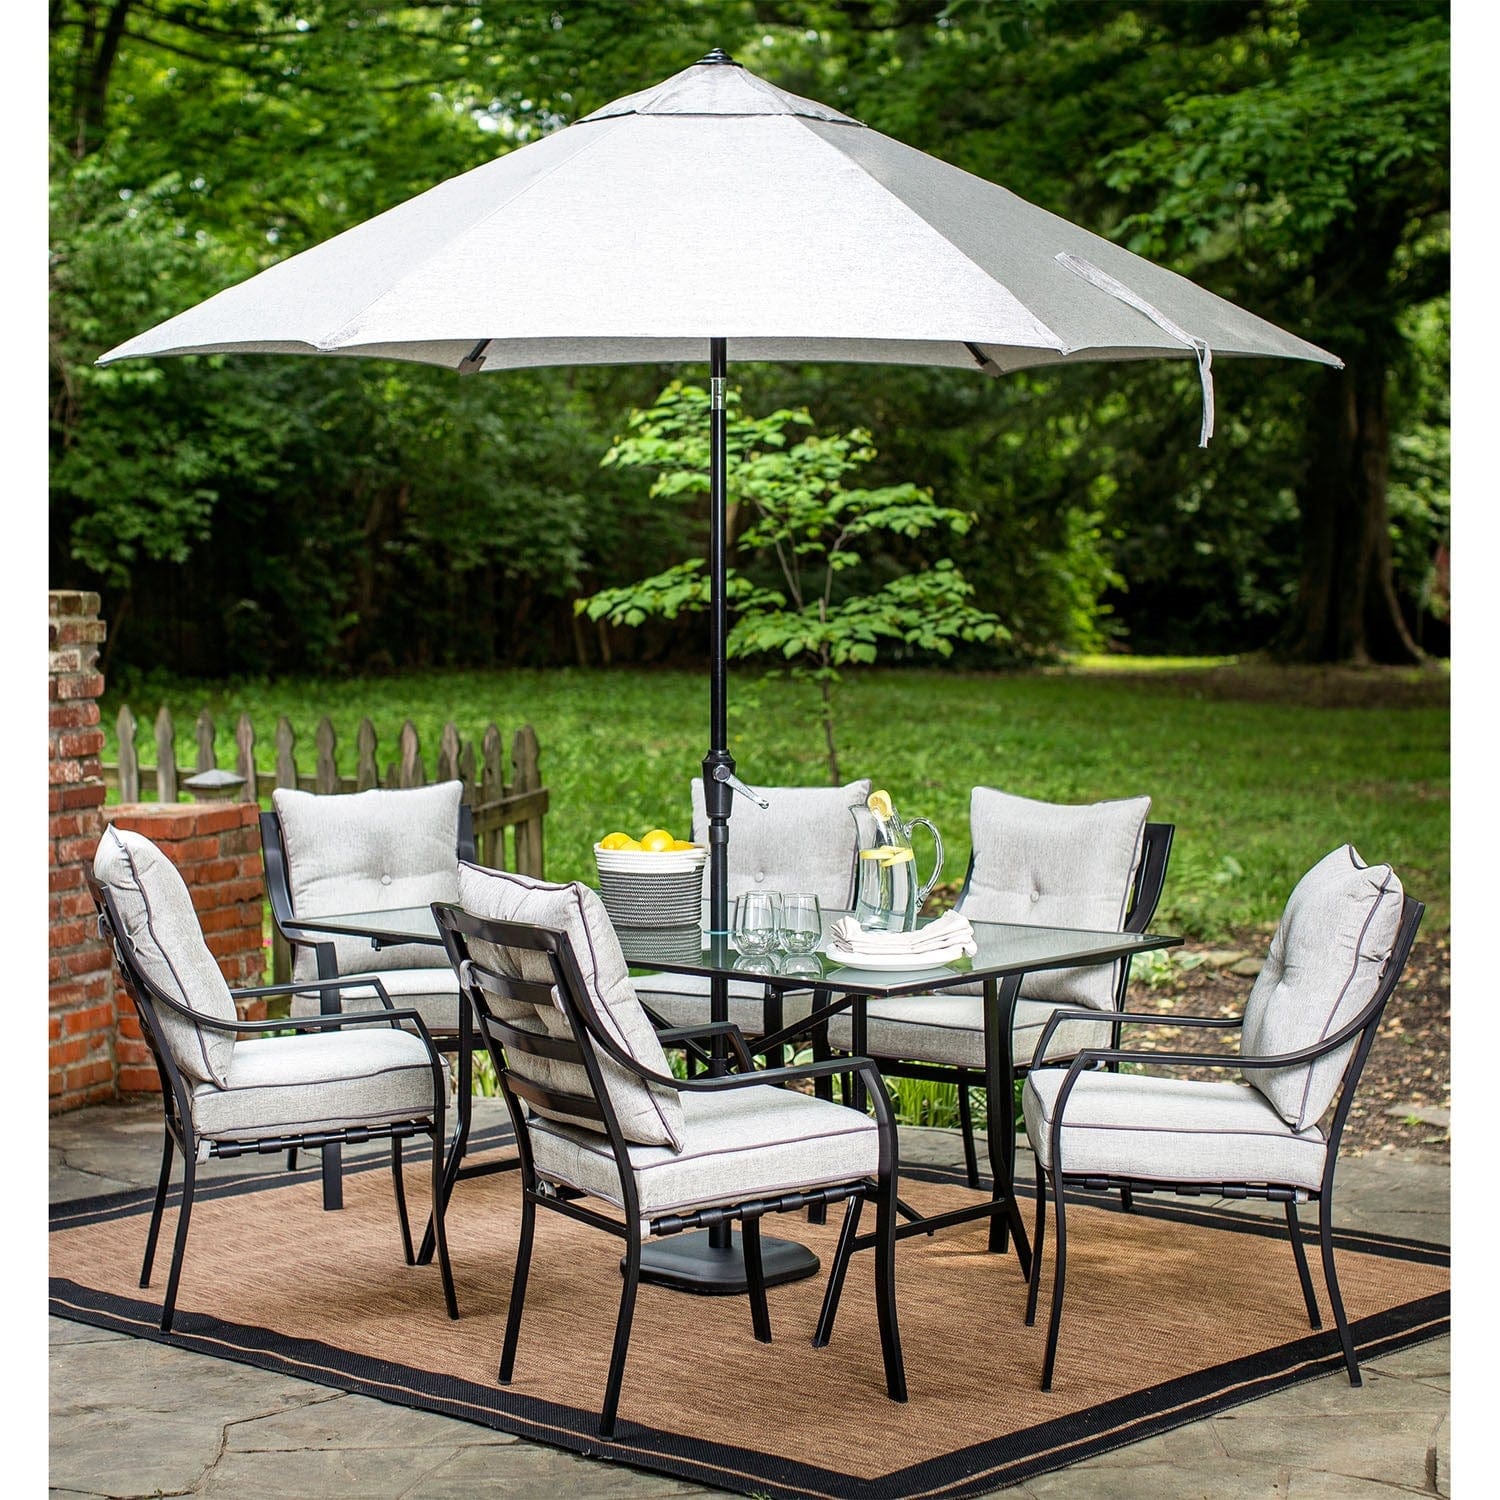 Hanover Table Umbrellas Hanover Table Umbrella for the Lavallette Outdoor Dining Collection |  Gray | LAVALLETTEUMB